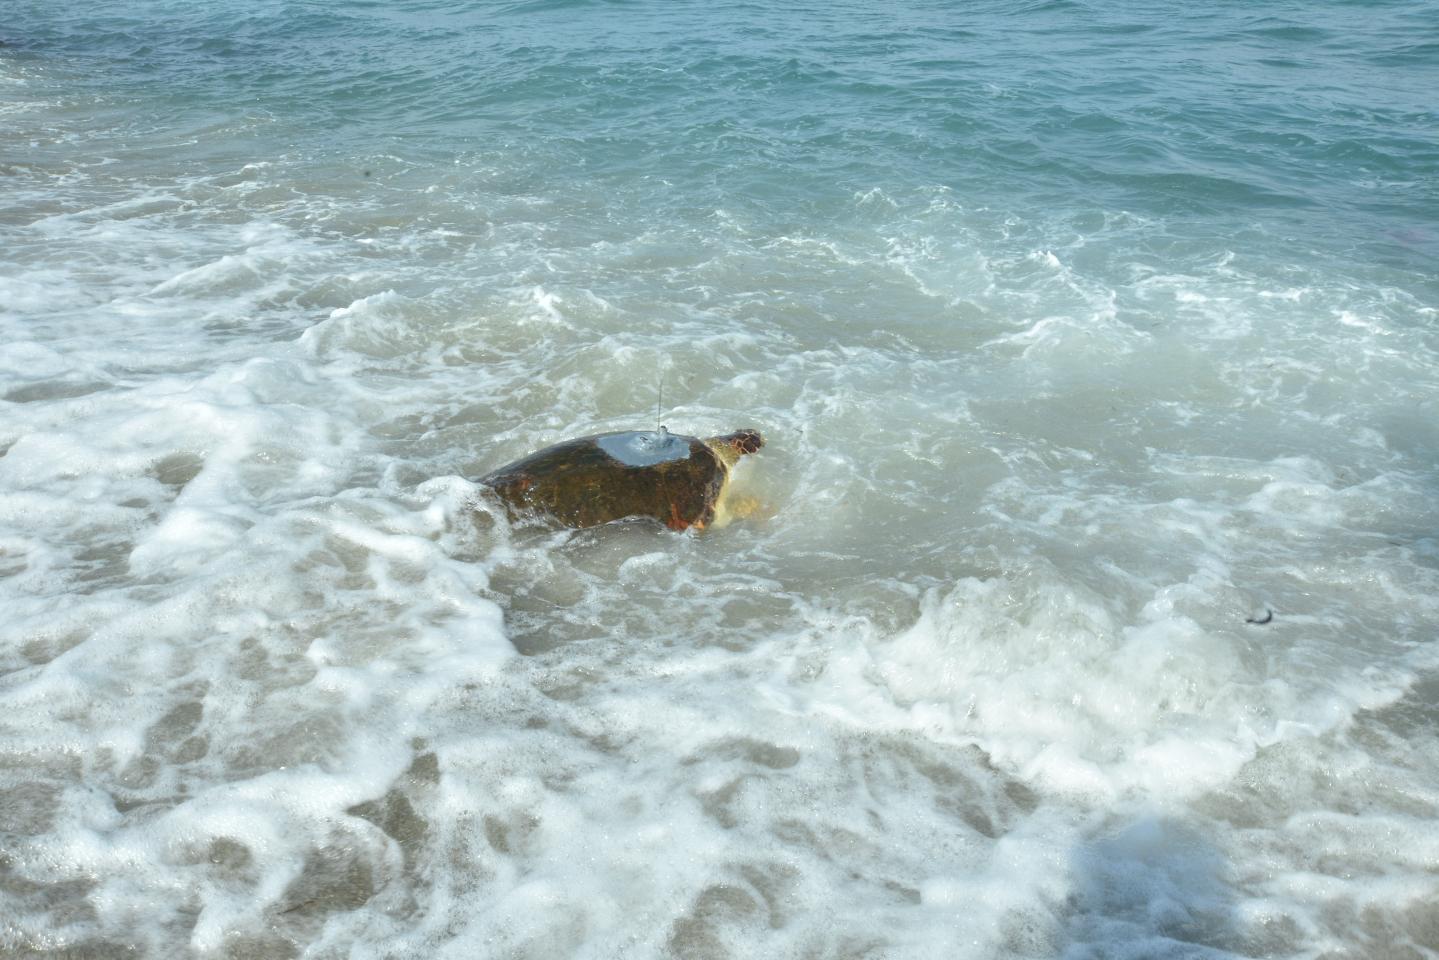 Very seriously injured Caretta Caretta named “Astrid” released to the sea after 4 Years Joint Treatment of Near East University Animal Hospital and Tashkent Nature Park